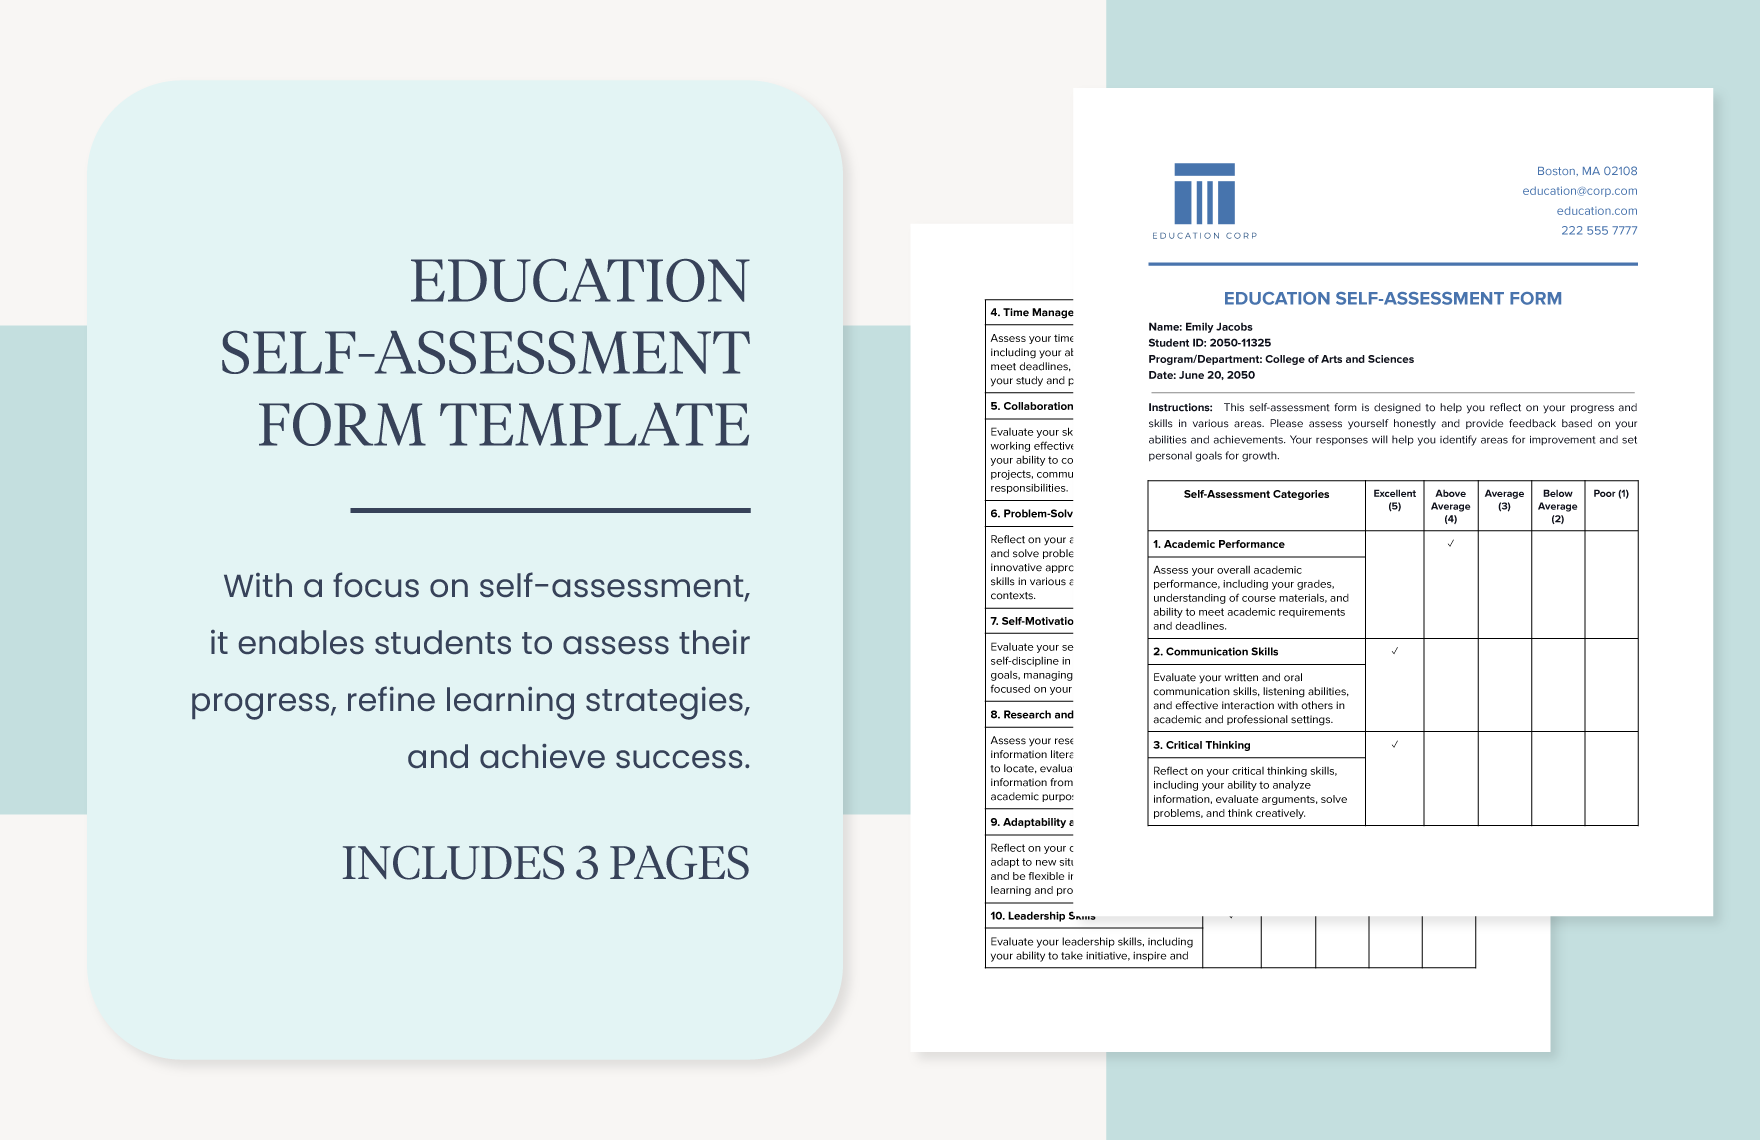 Education Self-Assessment Form Template in Word, Google Docs, PDF